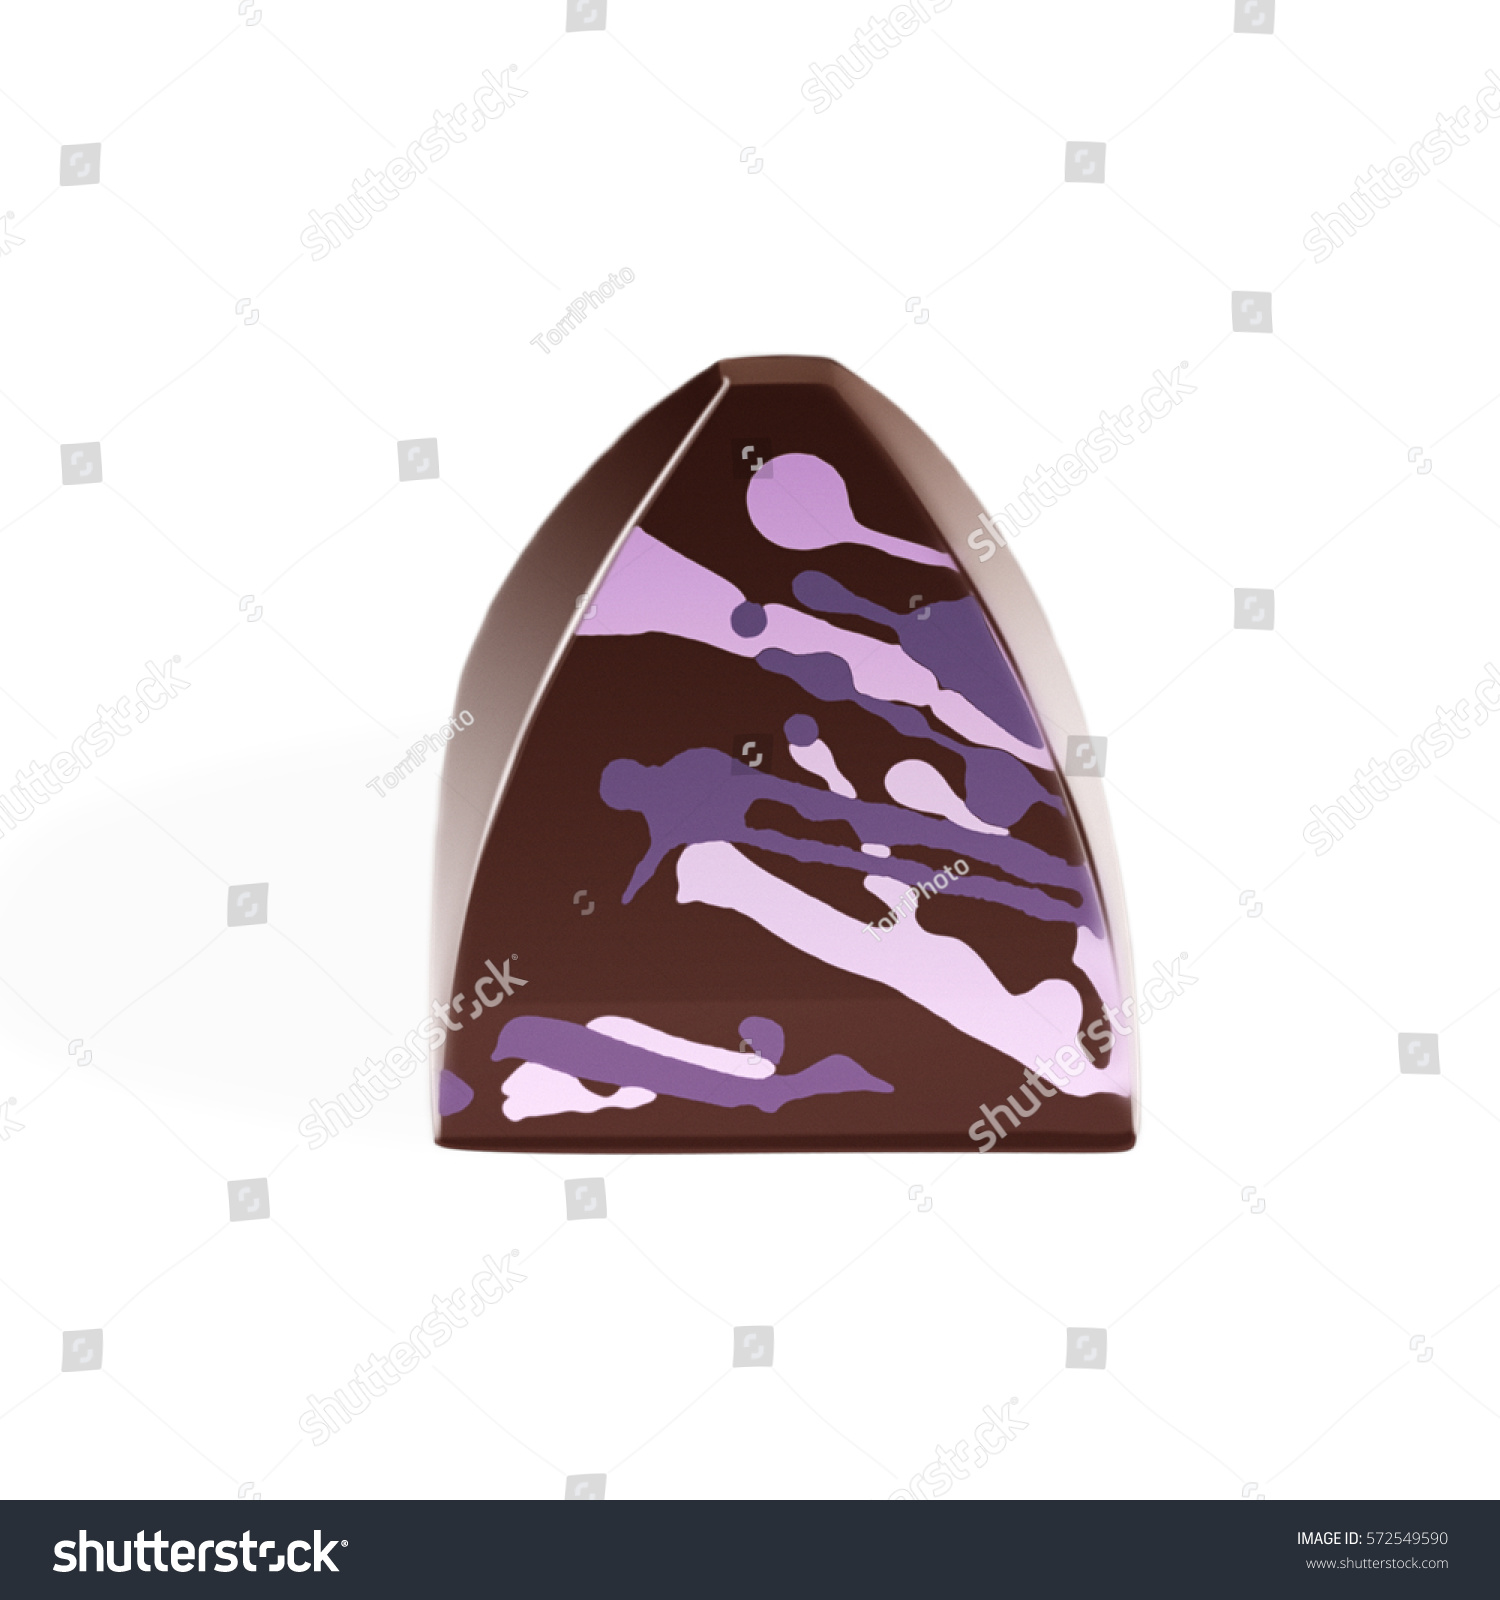 https://www.shutterstock.com/image-illustration/illustration-painted-pyramid-shape-chocolate-candy-572549590